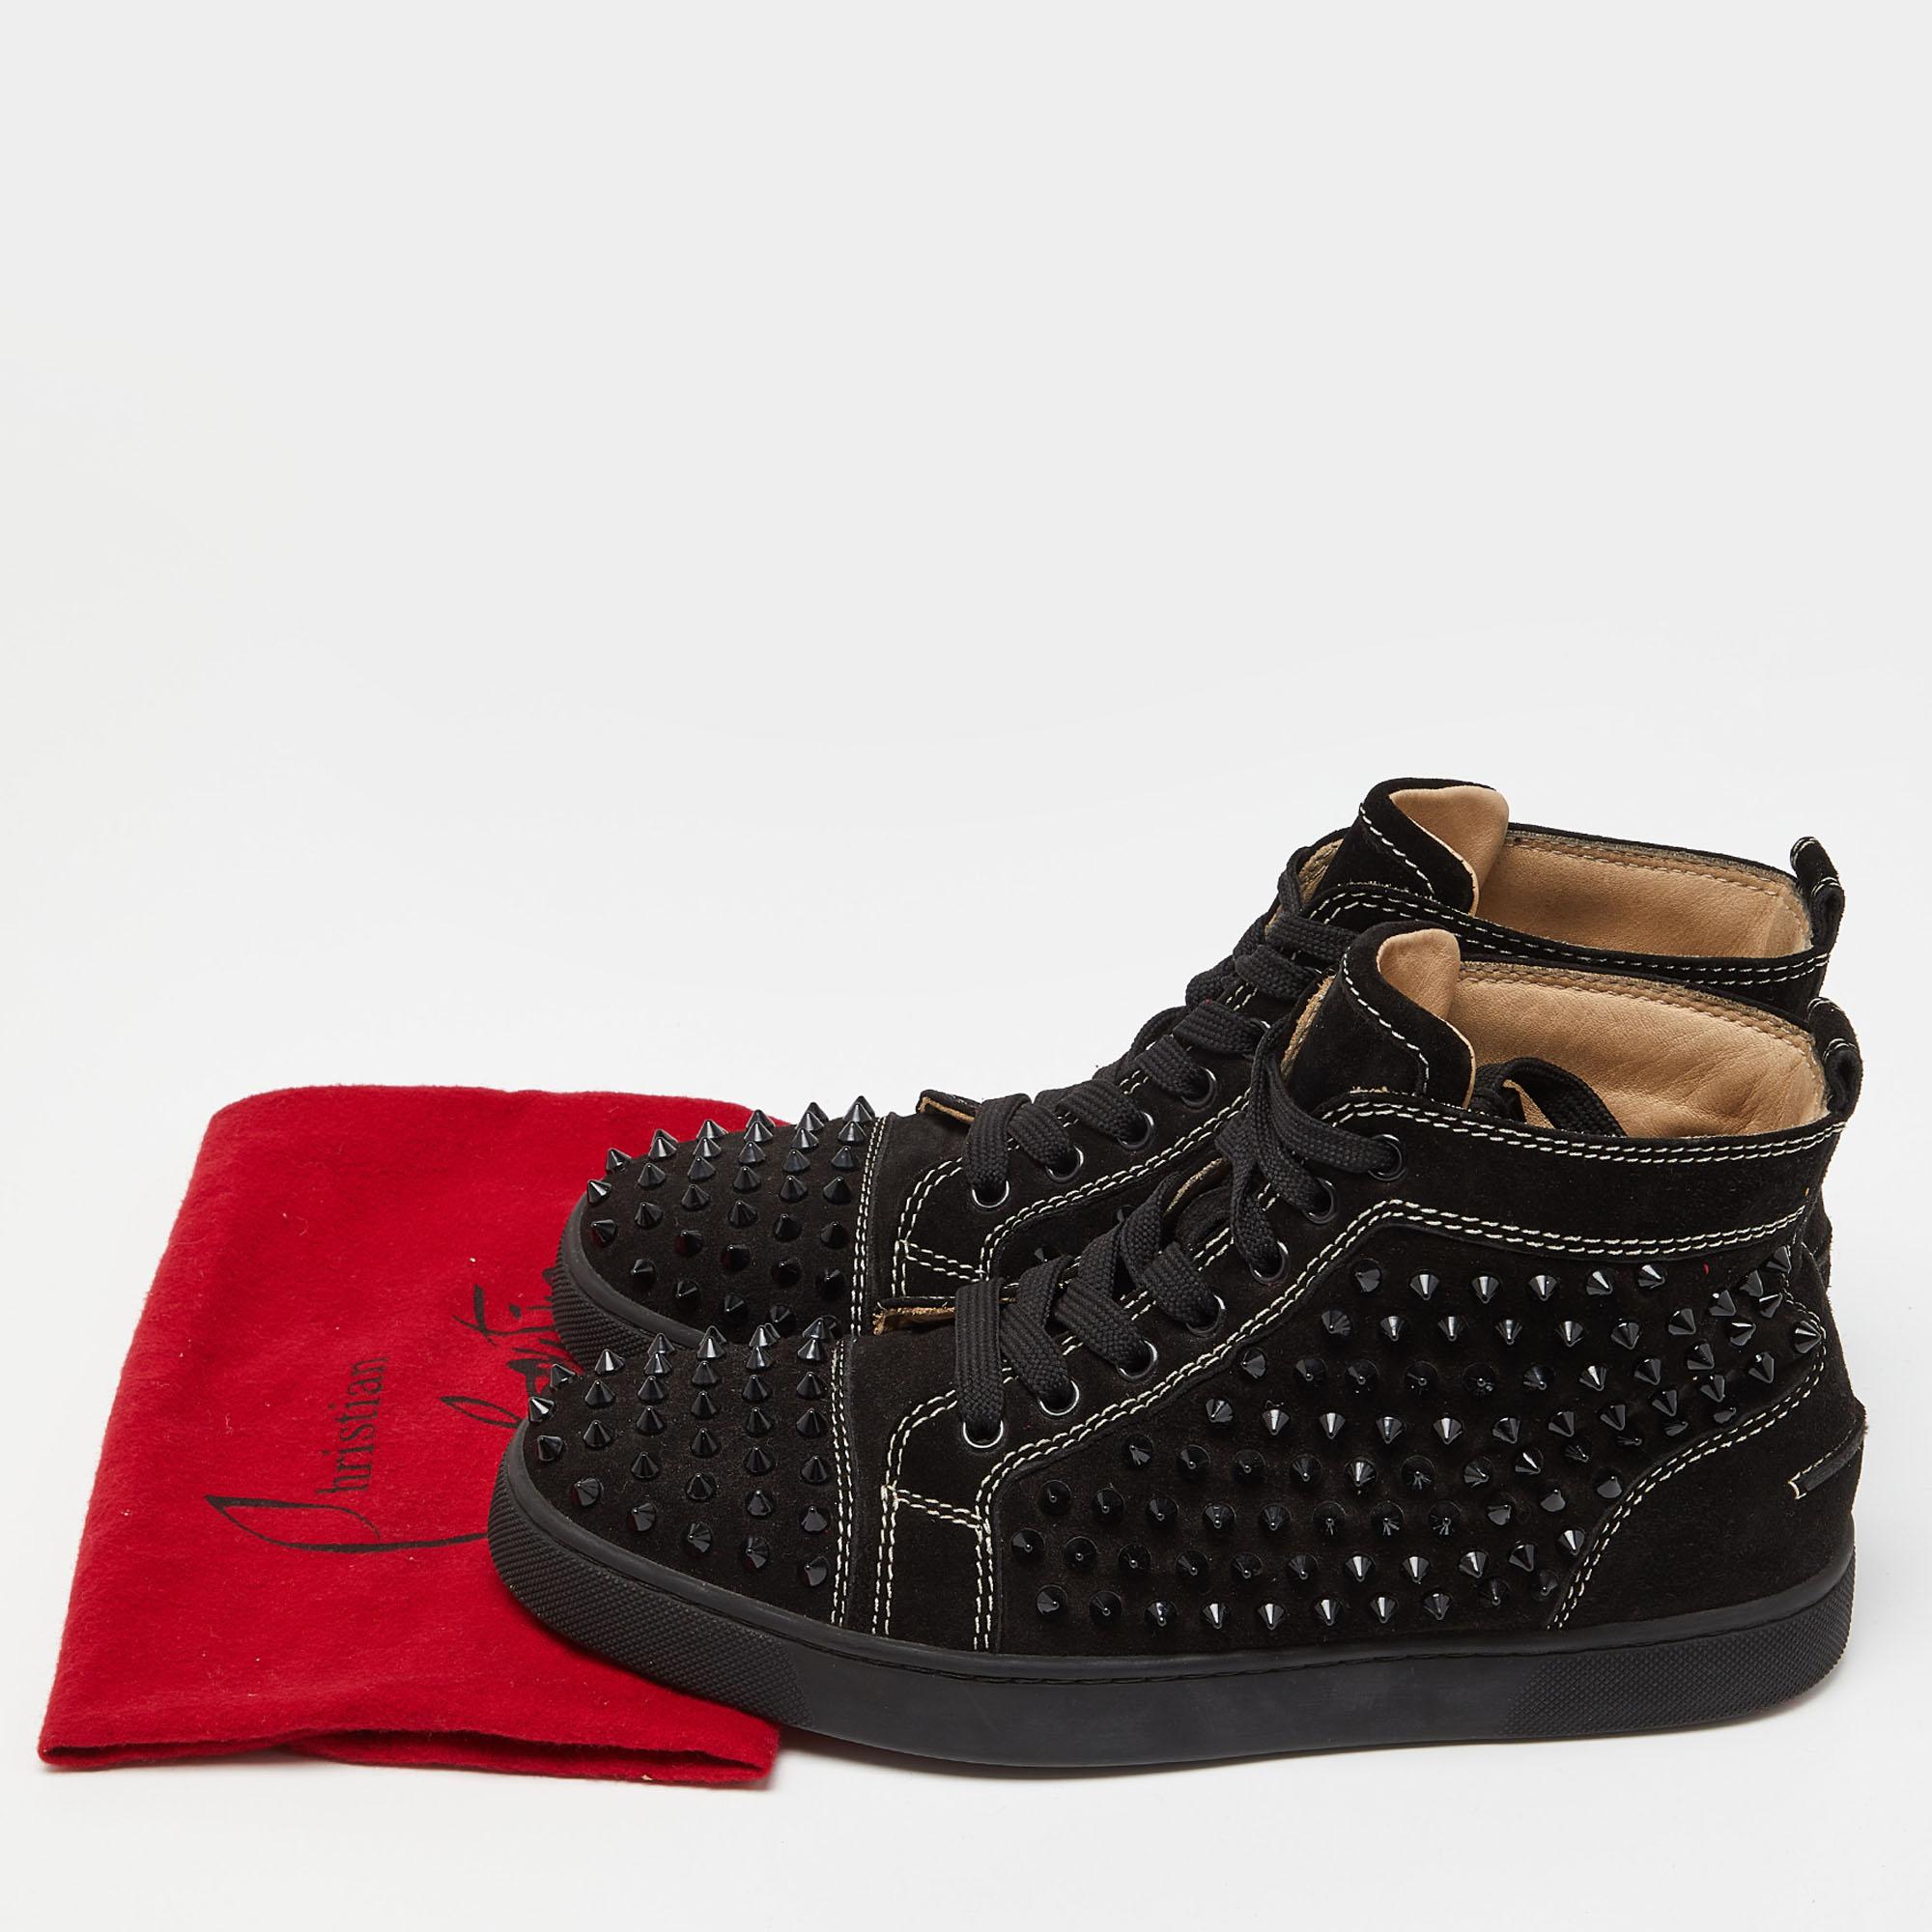 Christian Louboutin Black Suede Spike High Top Sneakers Size 40 For Sale 6